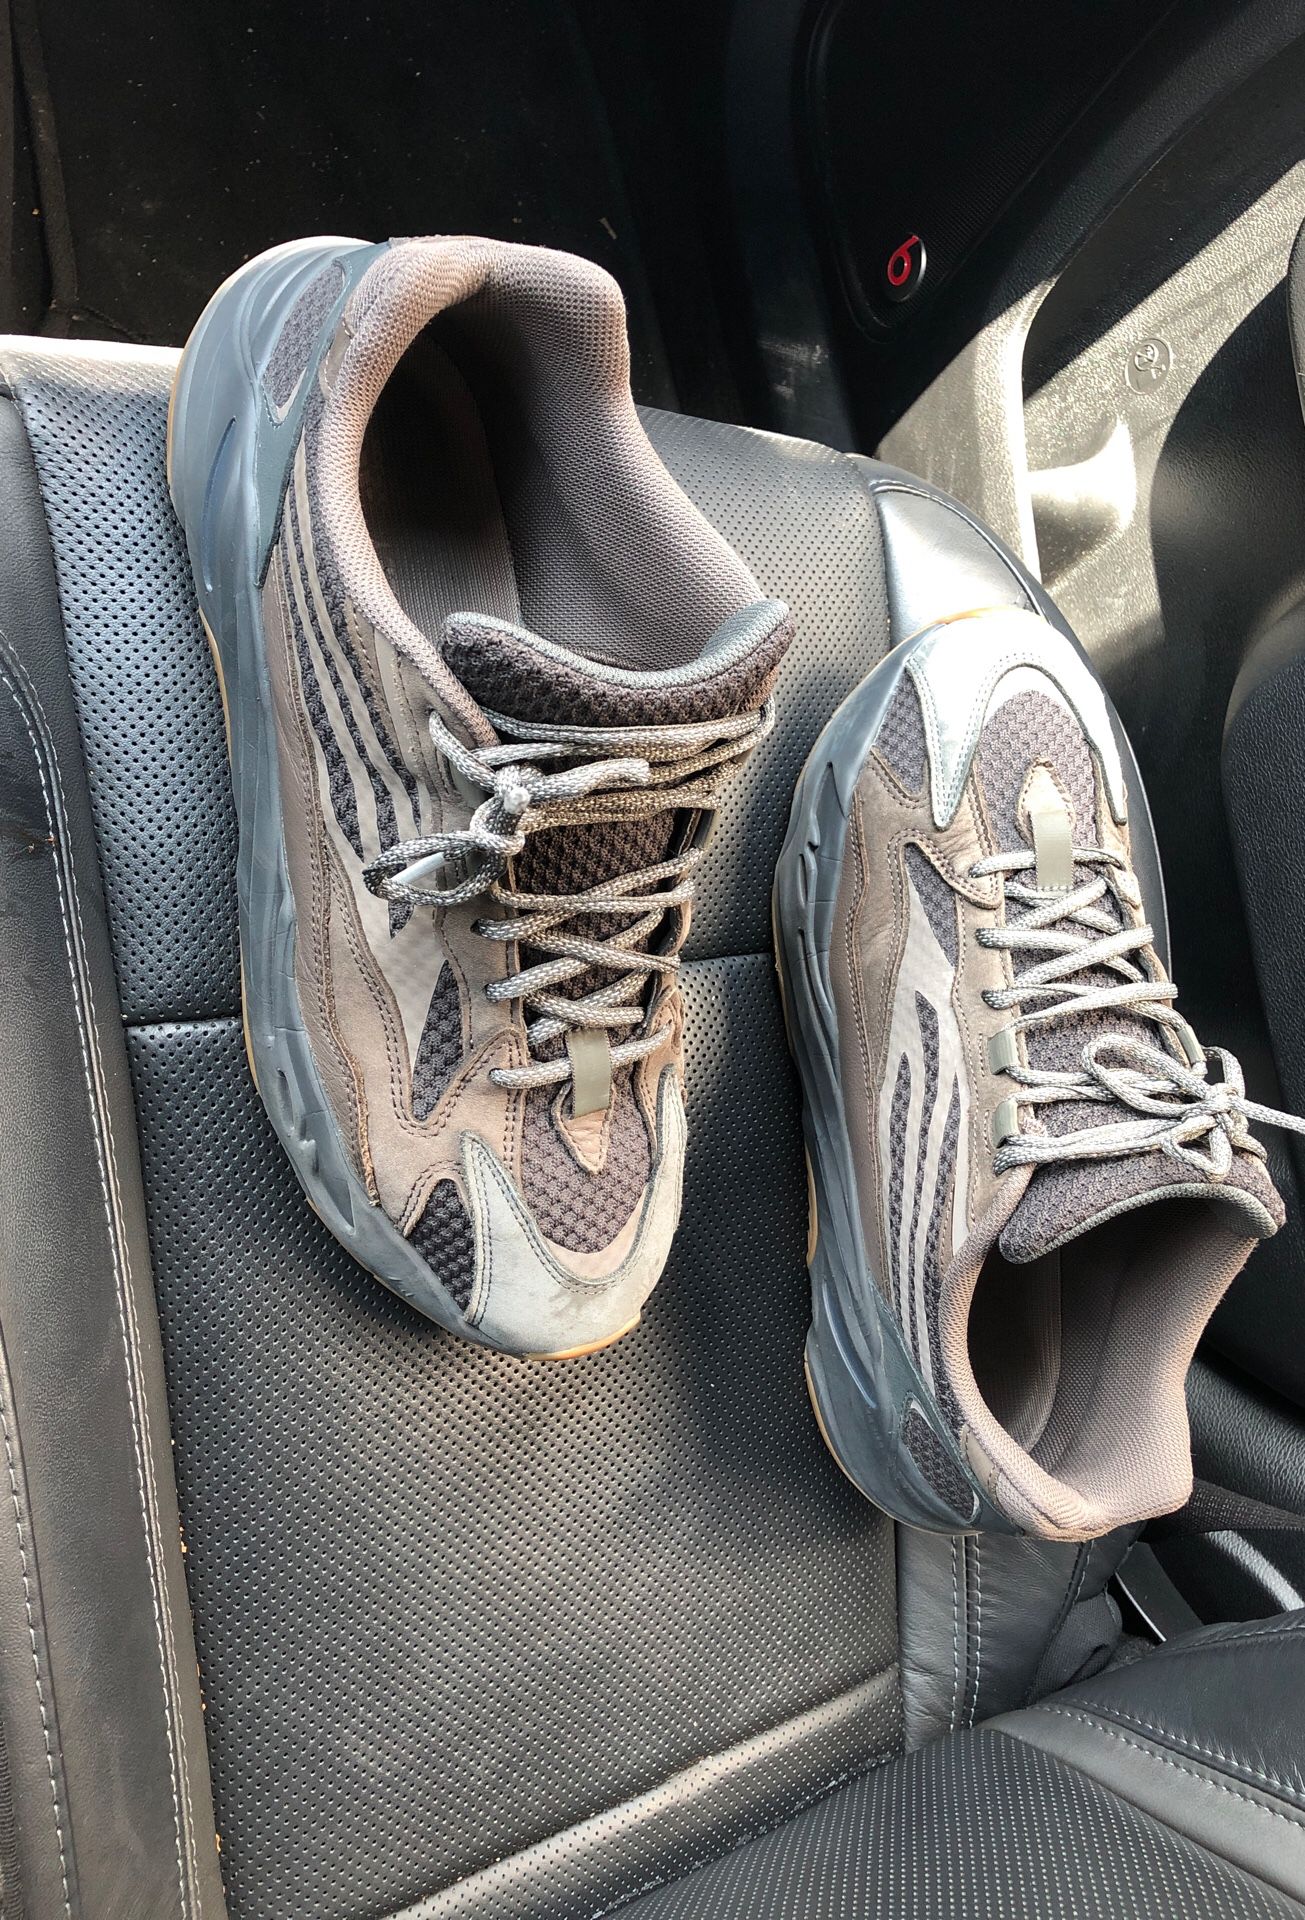 Yeezy 700 8/10 Size 12 NEED GONE TODAY ! DONT BS ME WITH BS OFFERS PLEASE AND THANK YOU